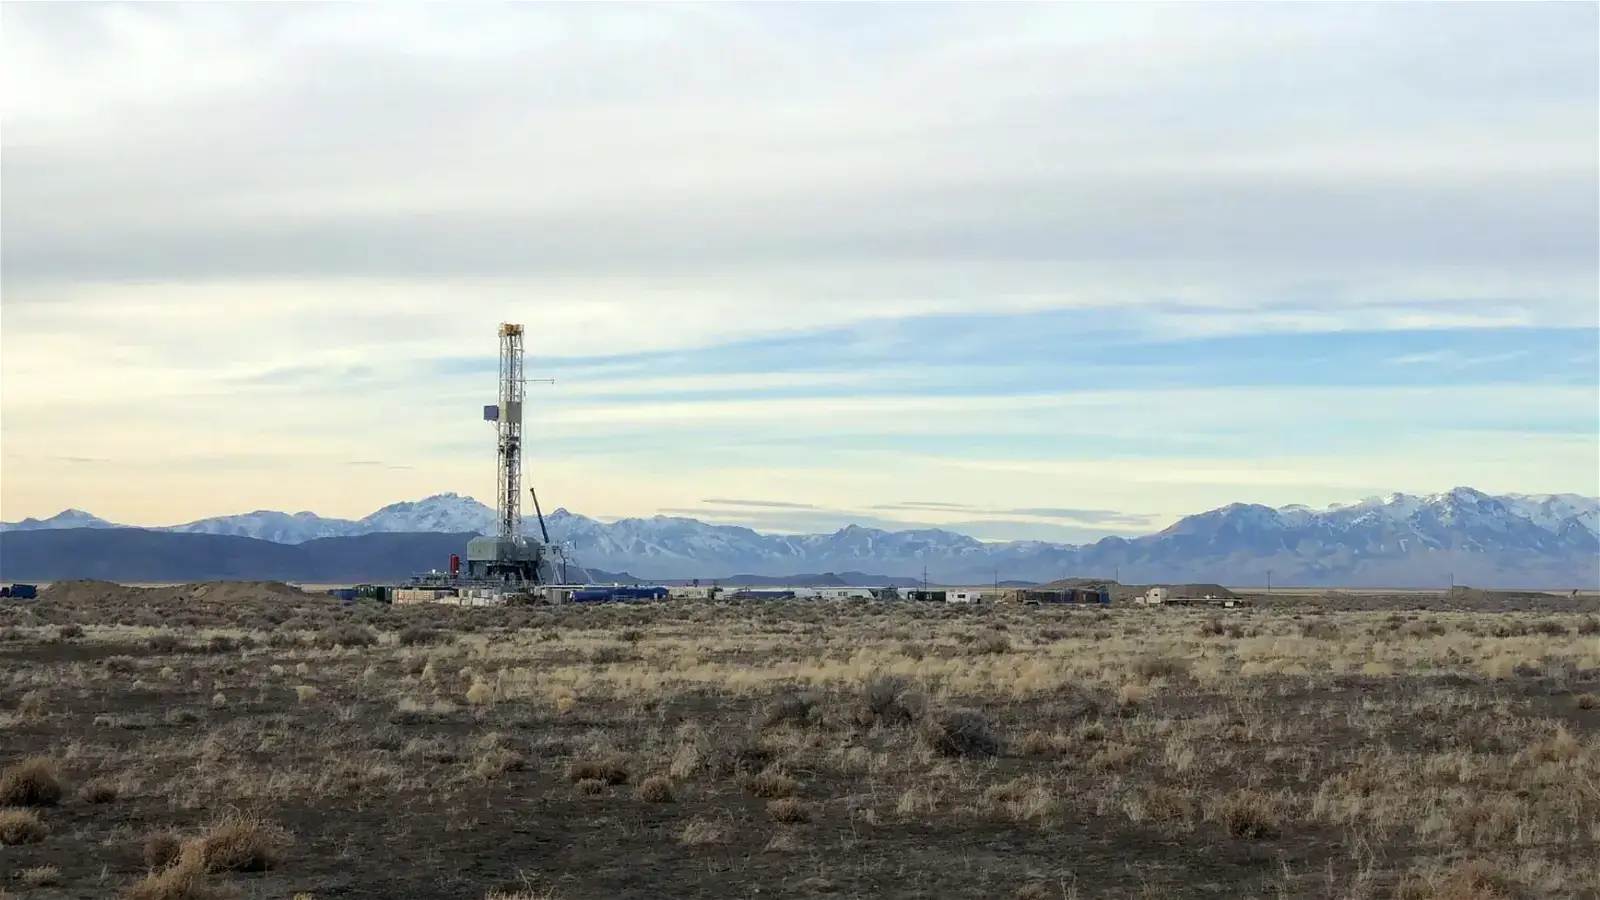 How a former oil guy is using fracking tech to boost geothermal energy